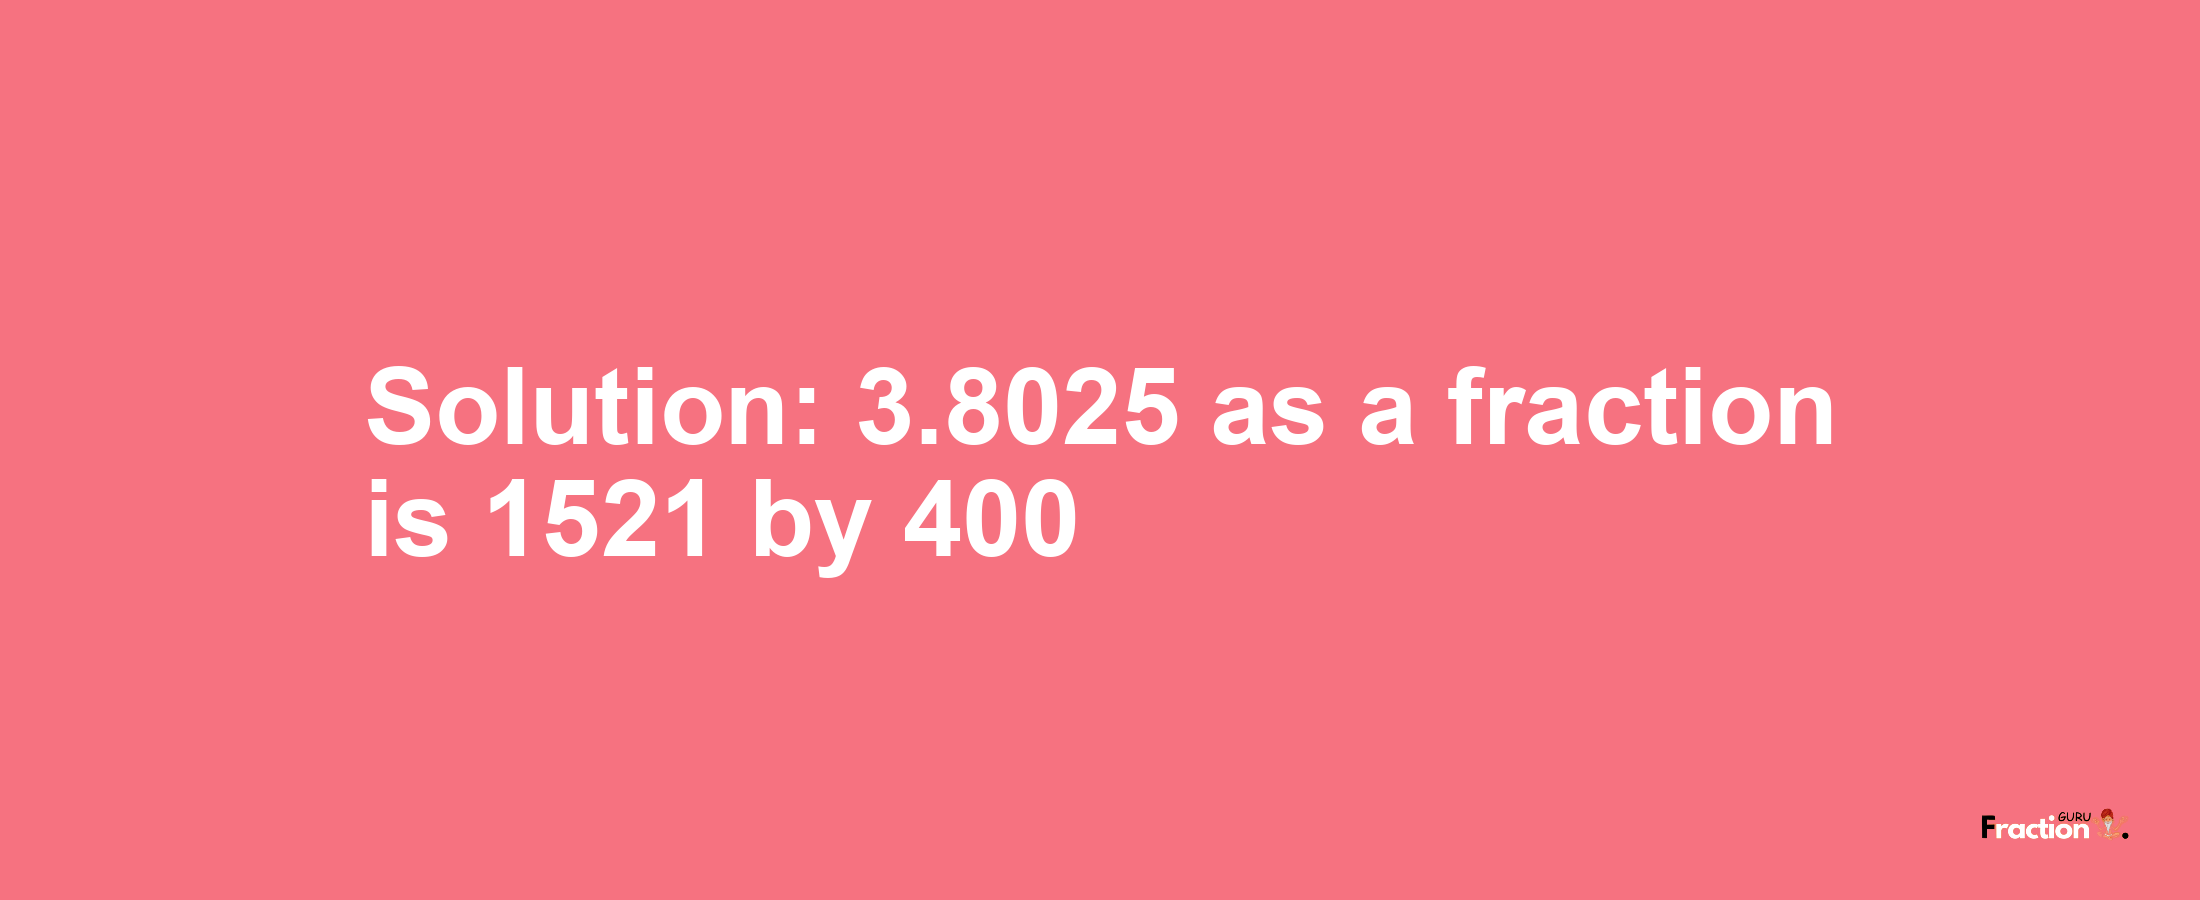 Solution:3.8025 as a fraction is 1521/400